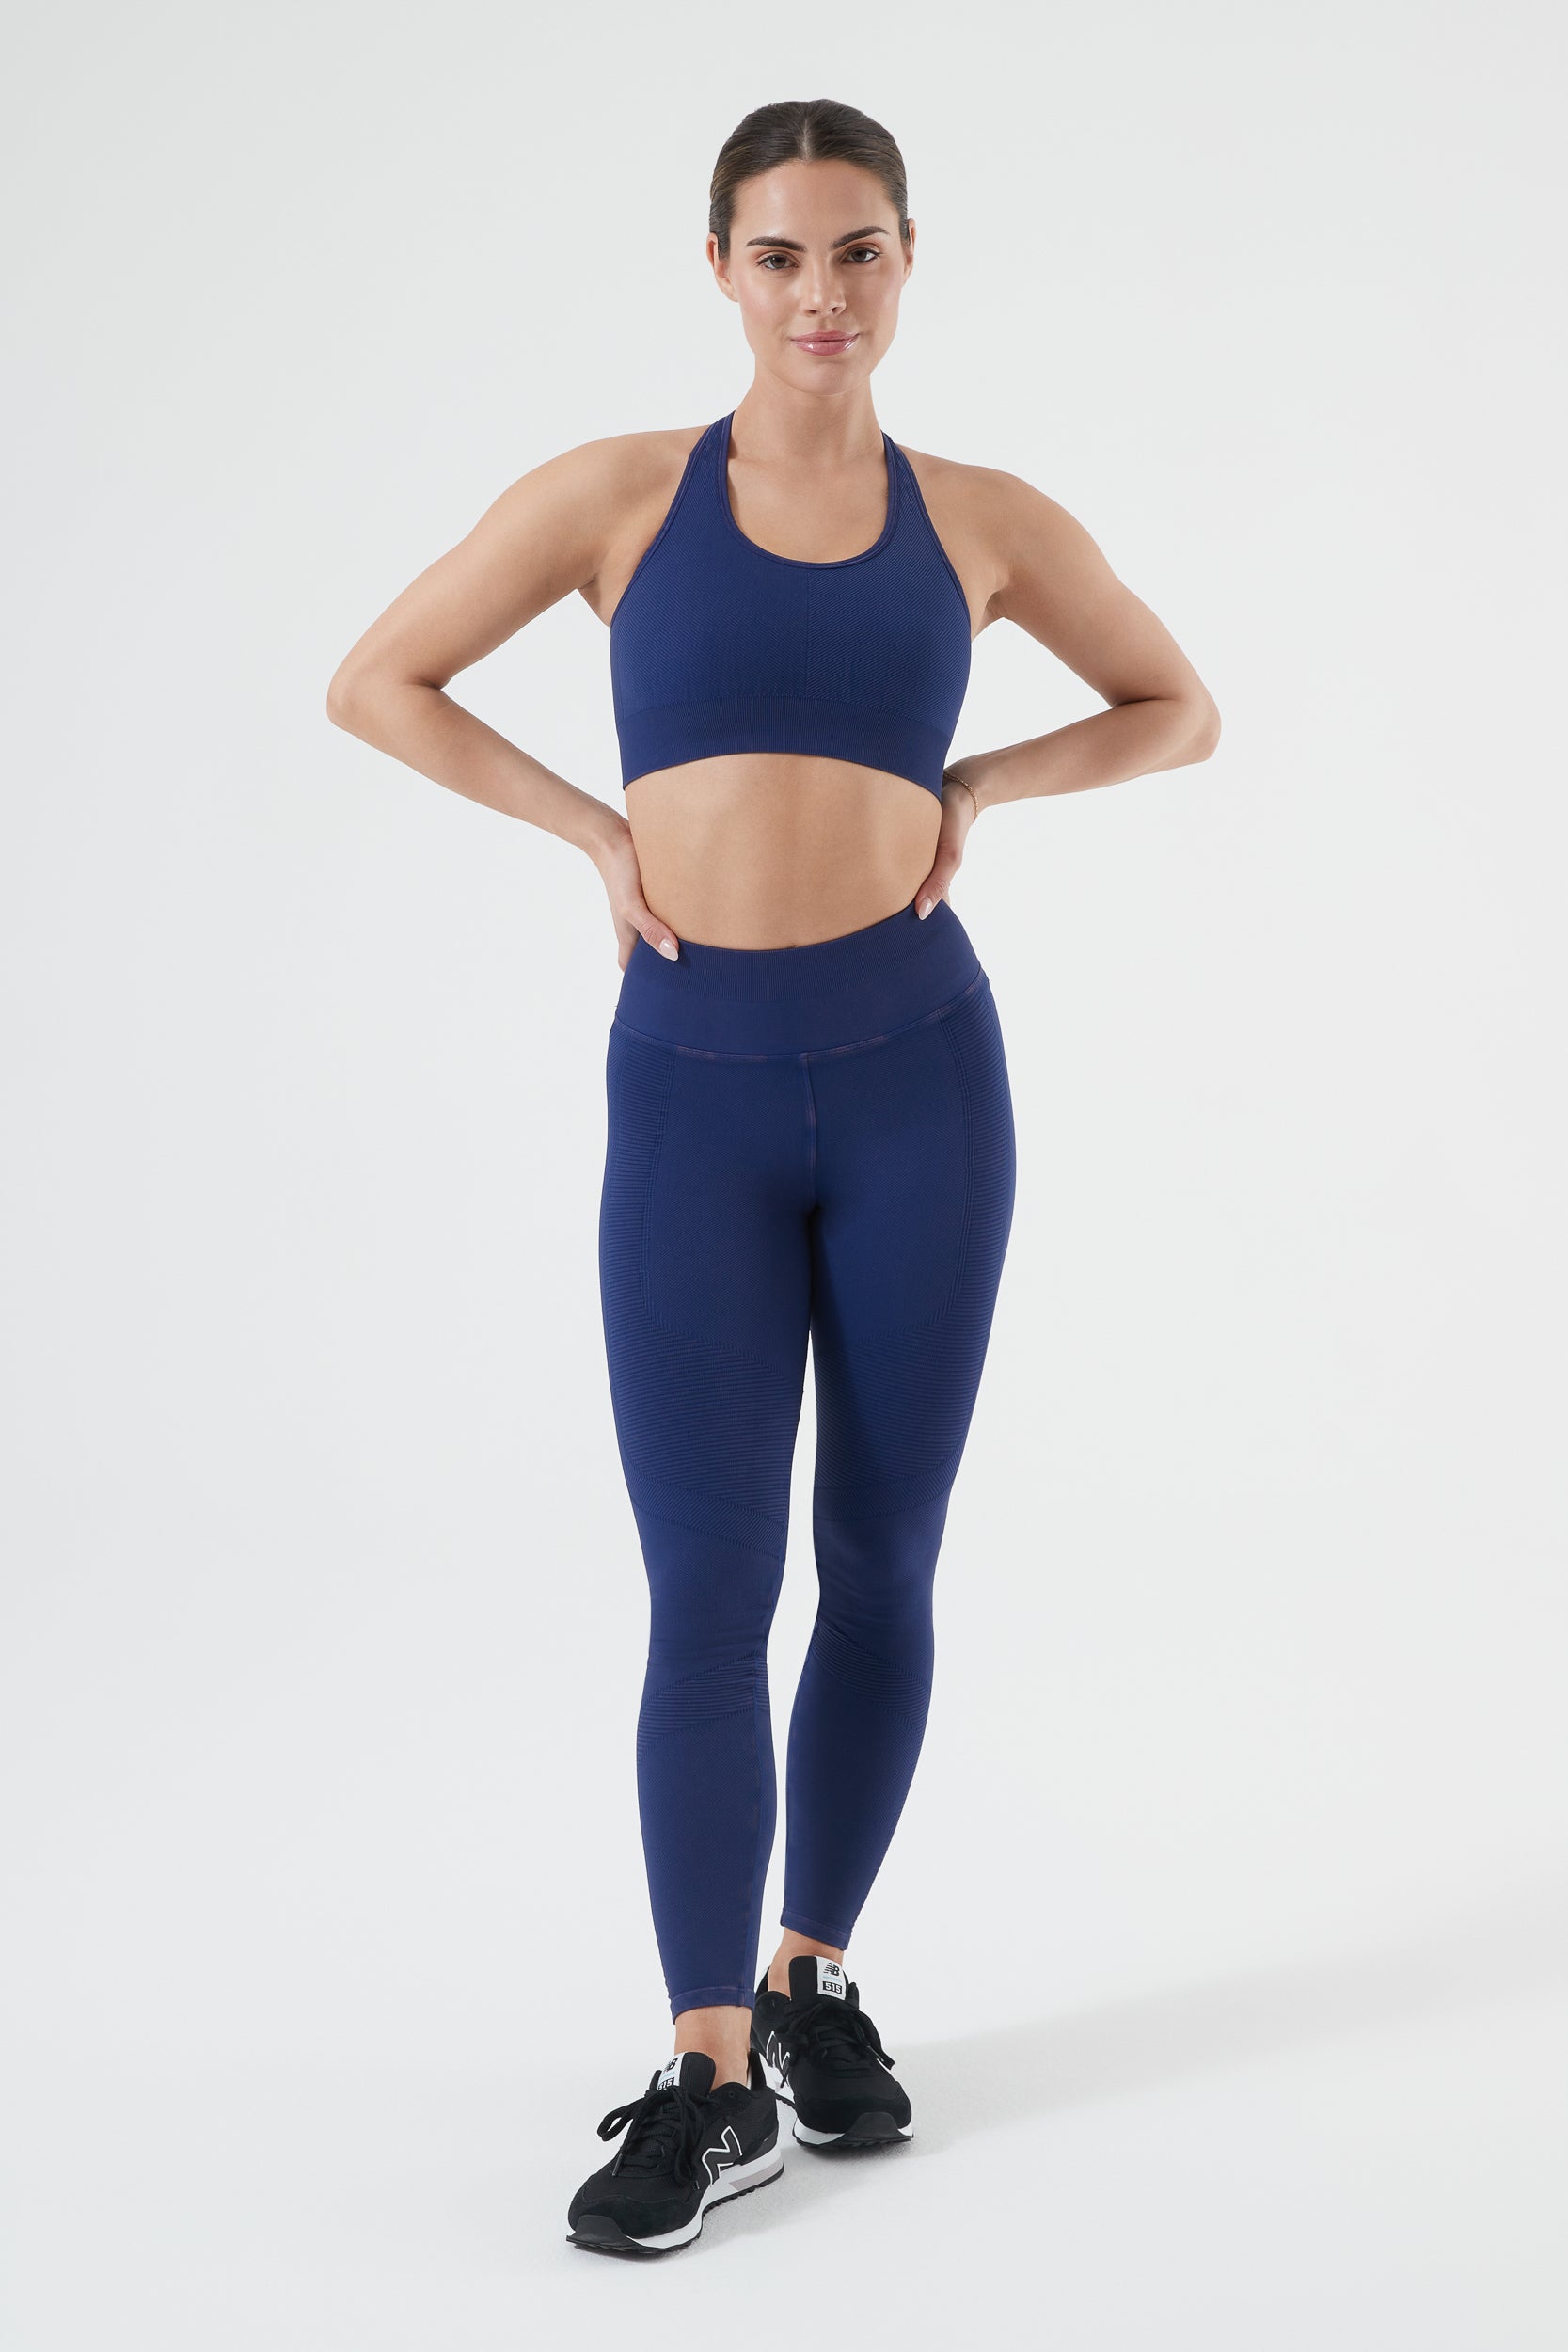 Stylish Persimmon Yoga Pants for a Comfortable Workout